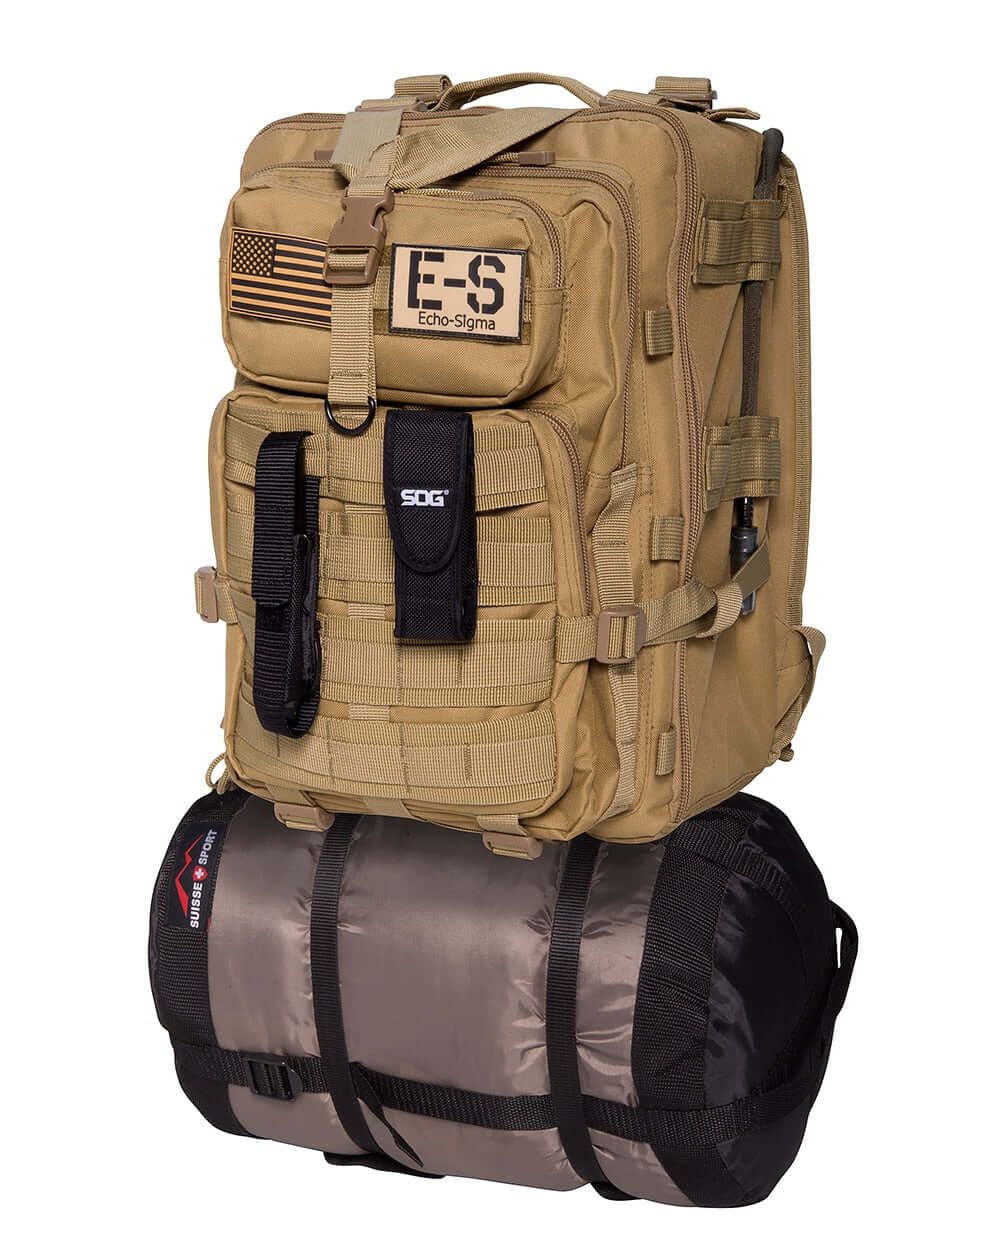 How to Build the Best Bug-Out Bag